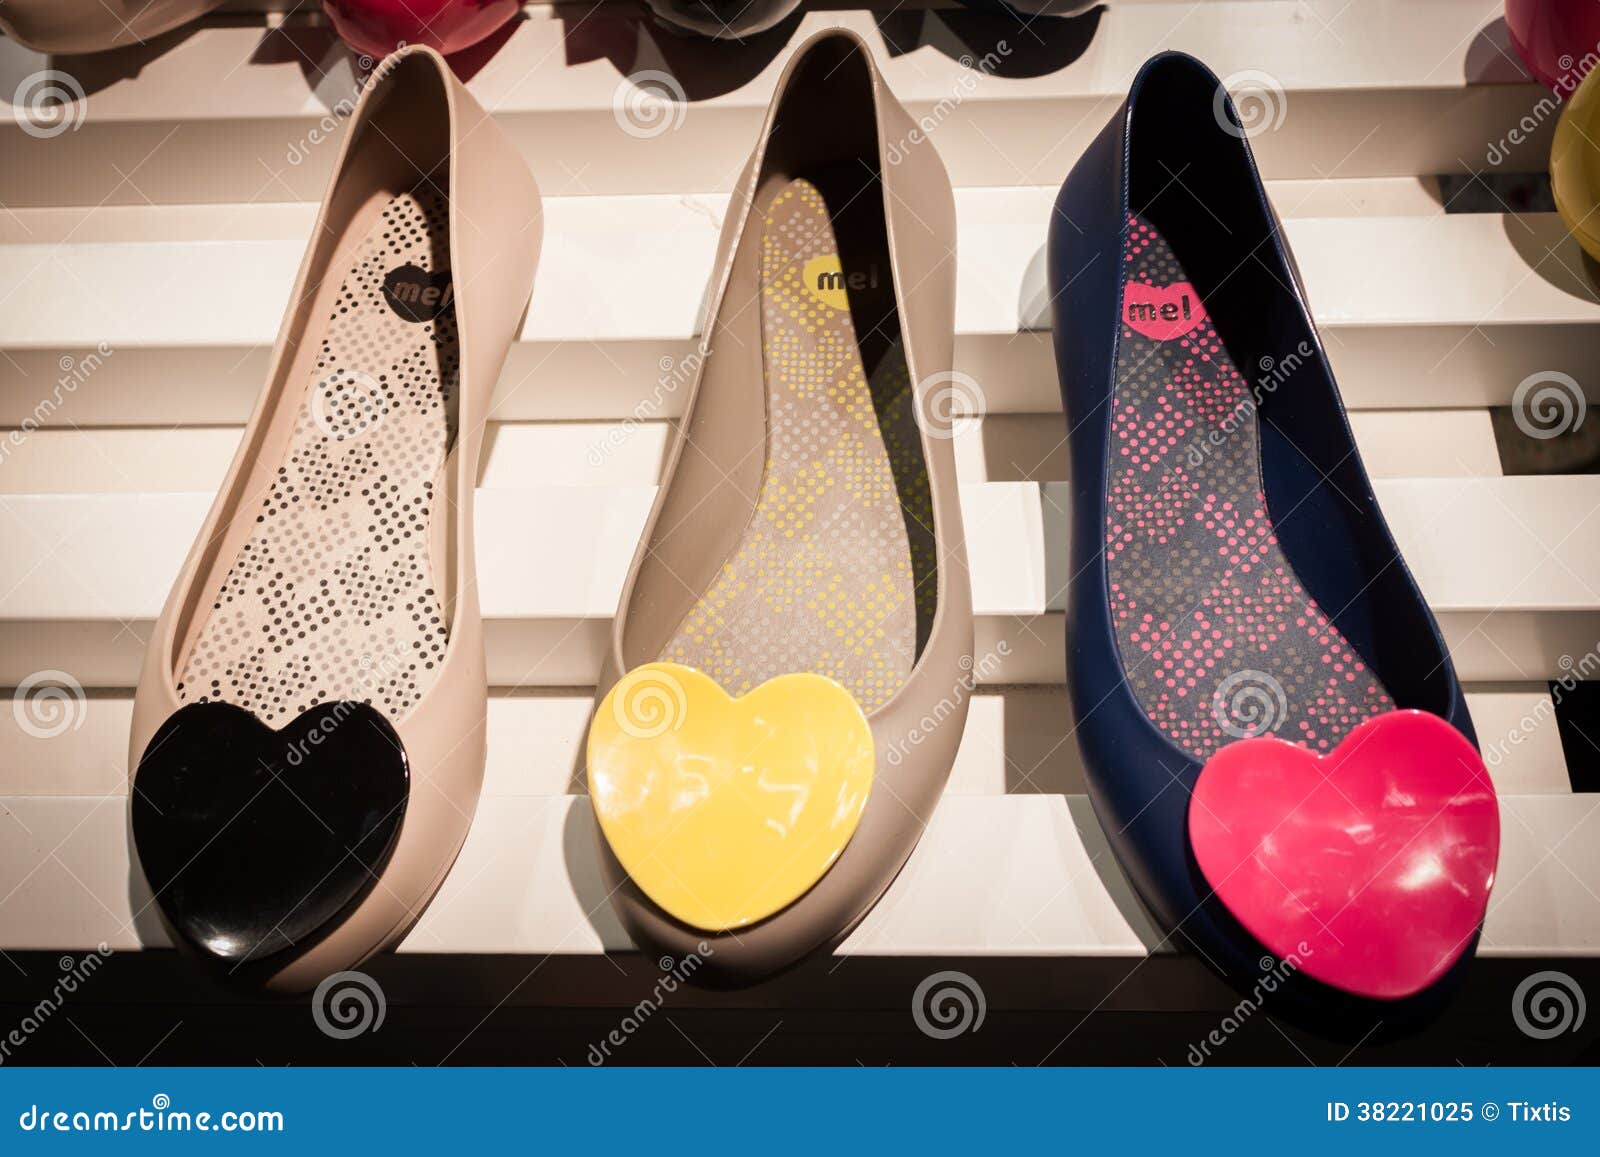 Shoes On Dispaly At Mipap Trade Show In Milan, Italy Editorial Image ...